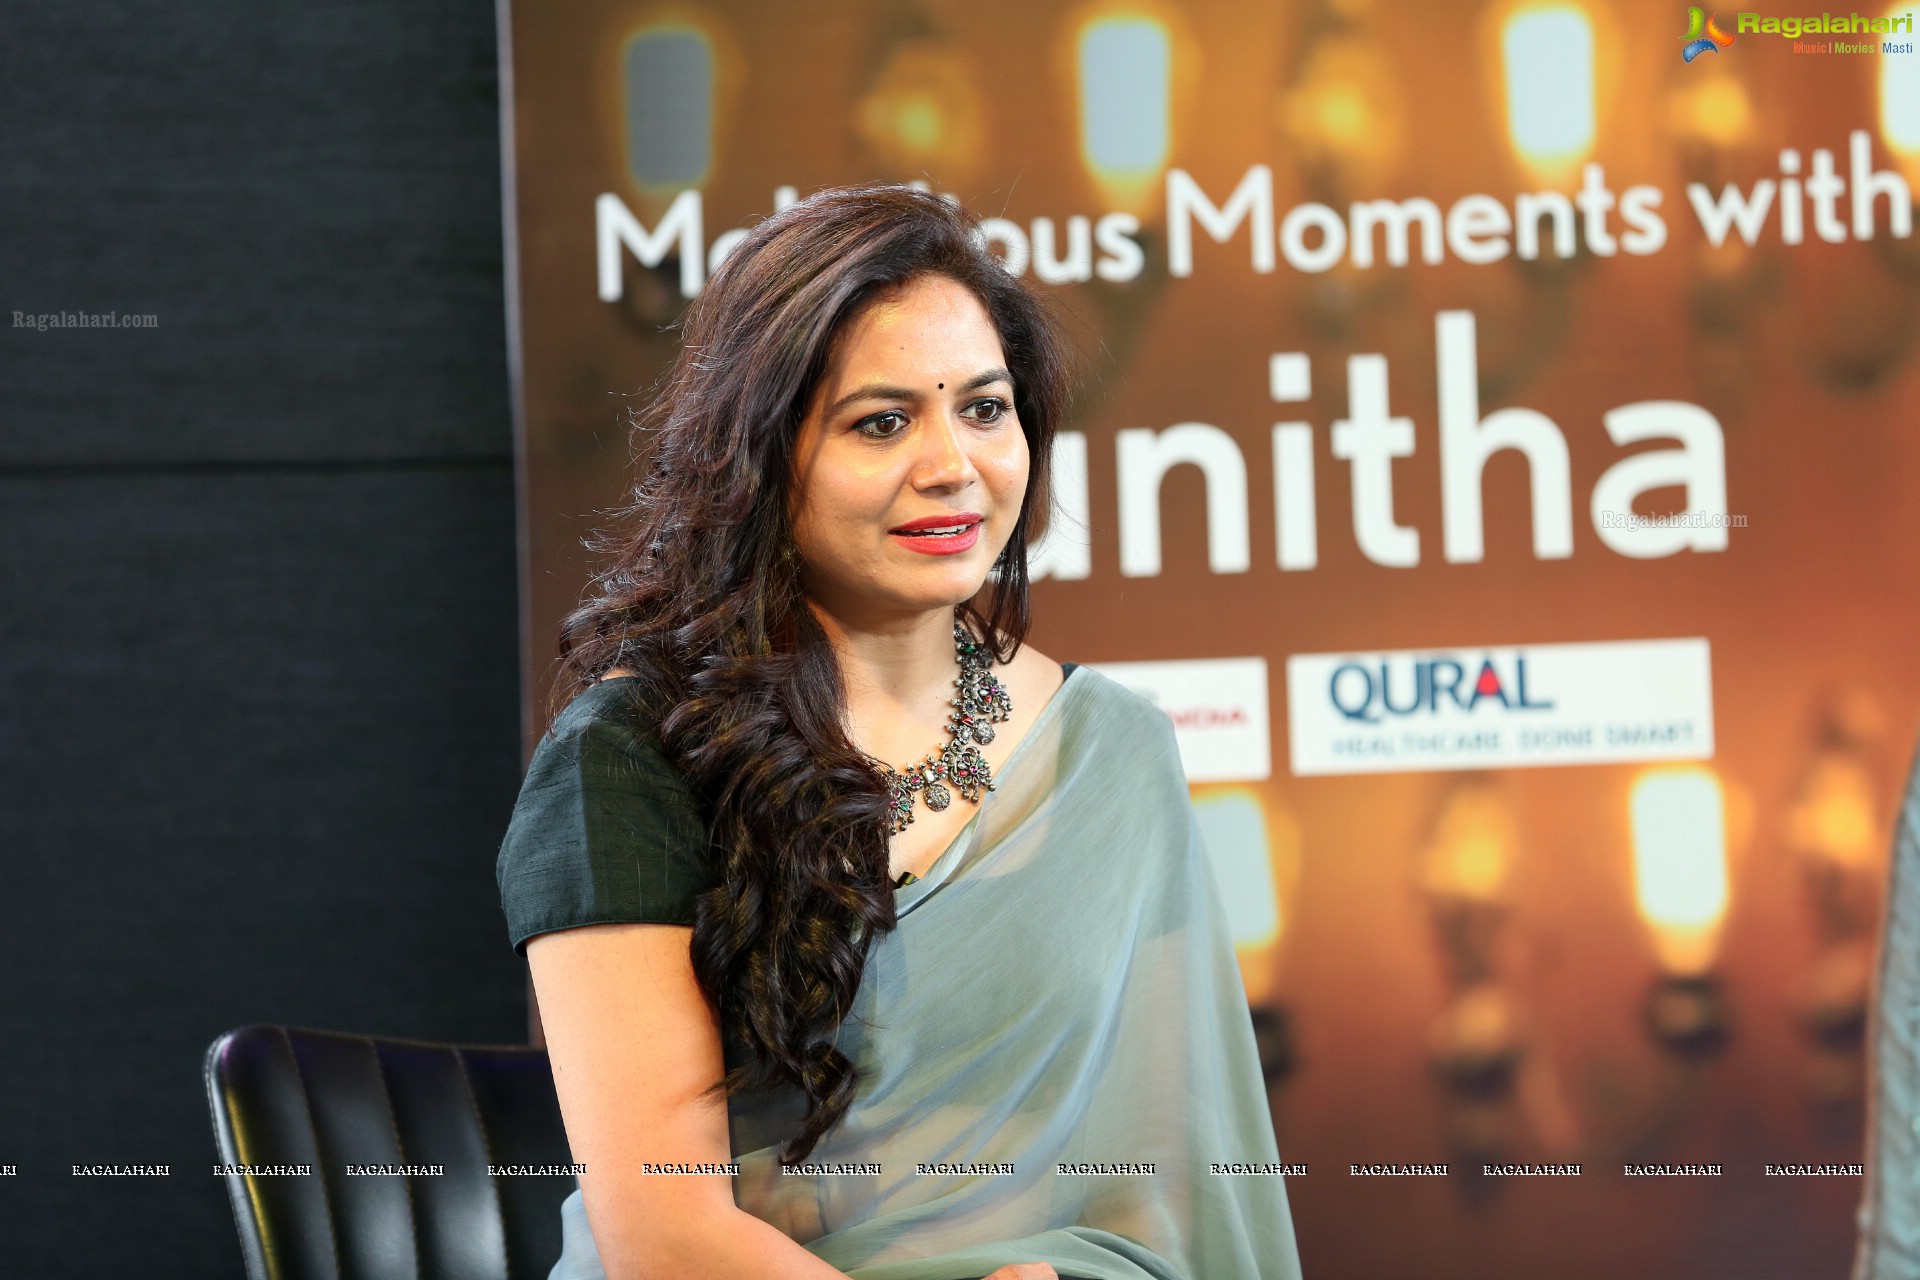 Sunitha @ Melodious Moments With Sunitha - Live Concert